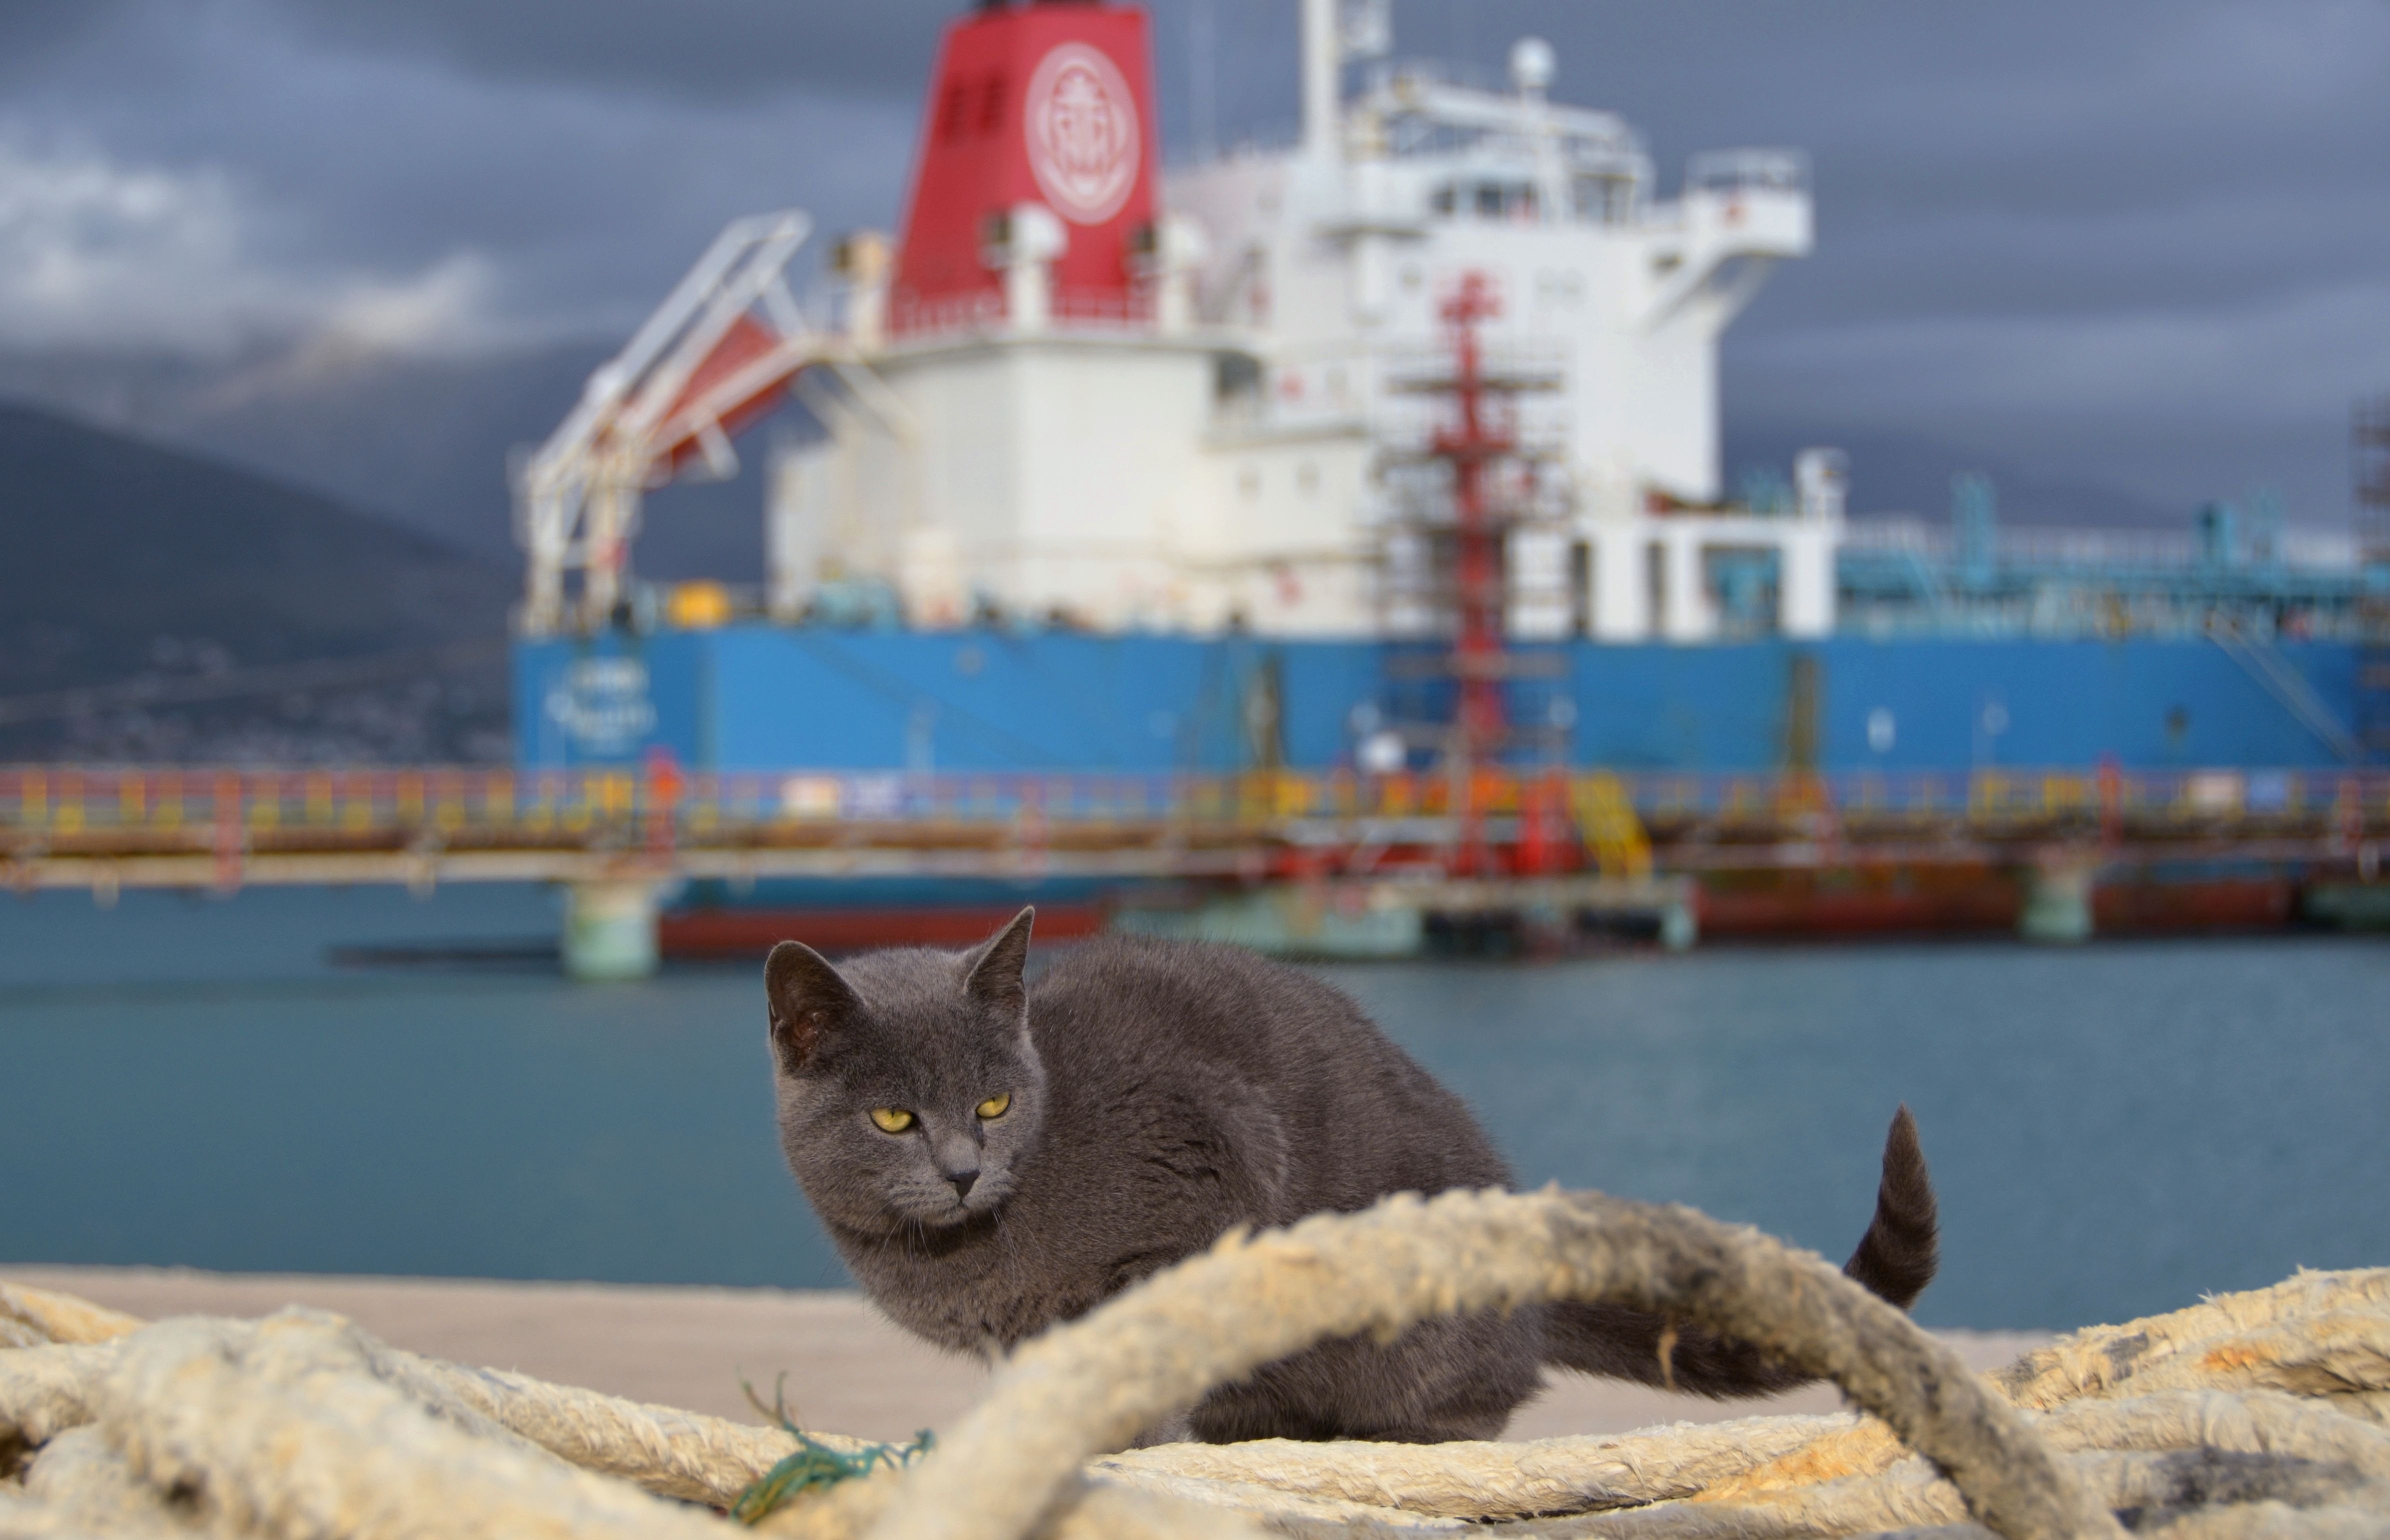 sea, animals, sit, cat, ship wallpaper for mobile